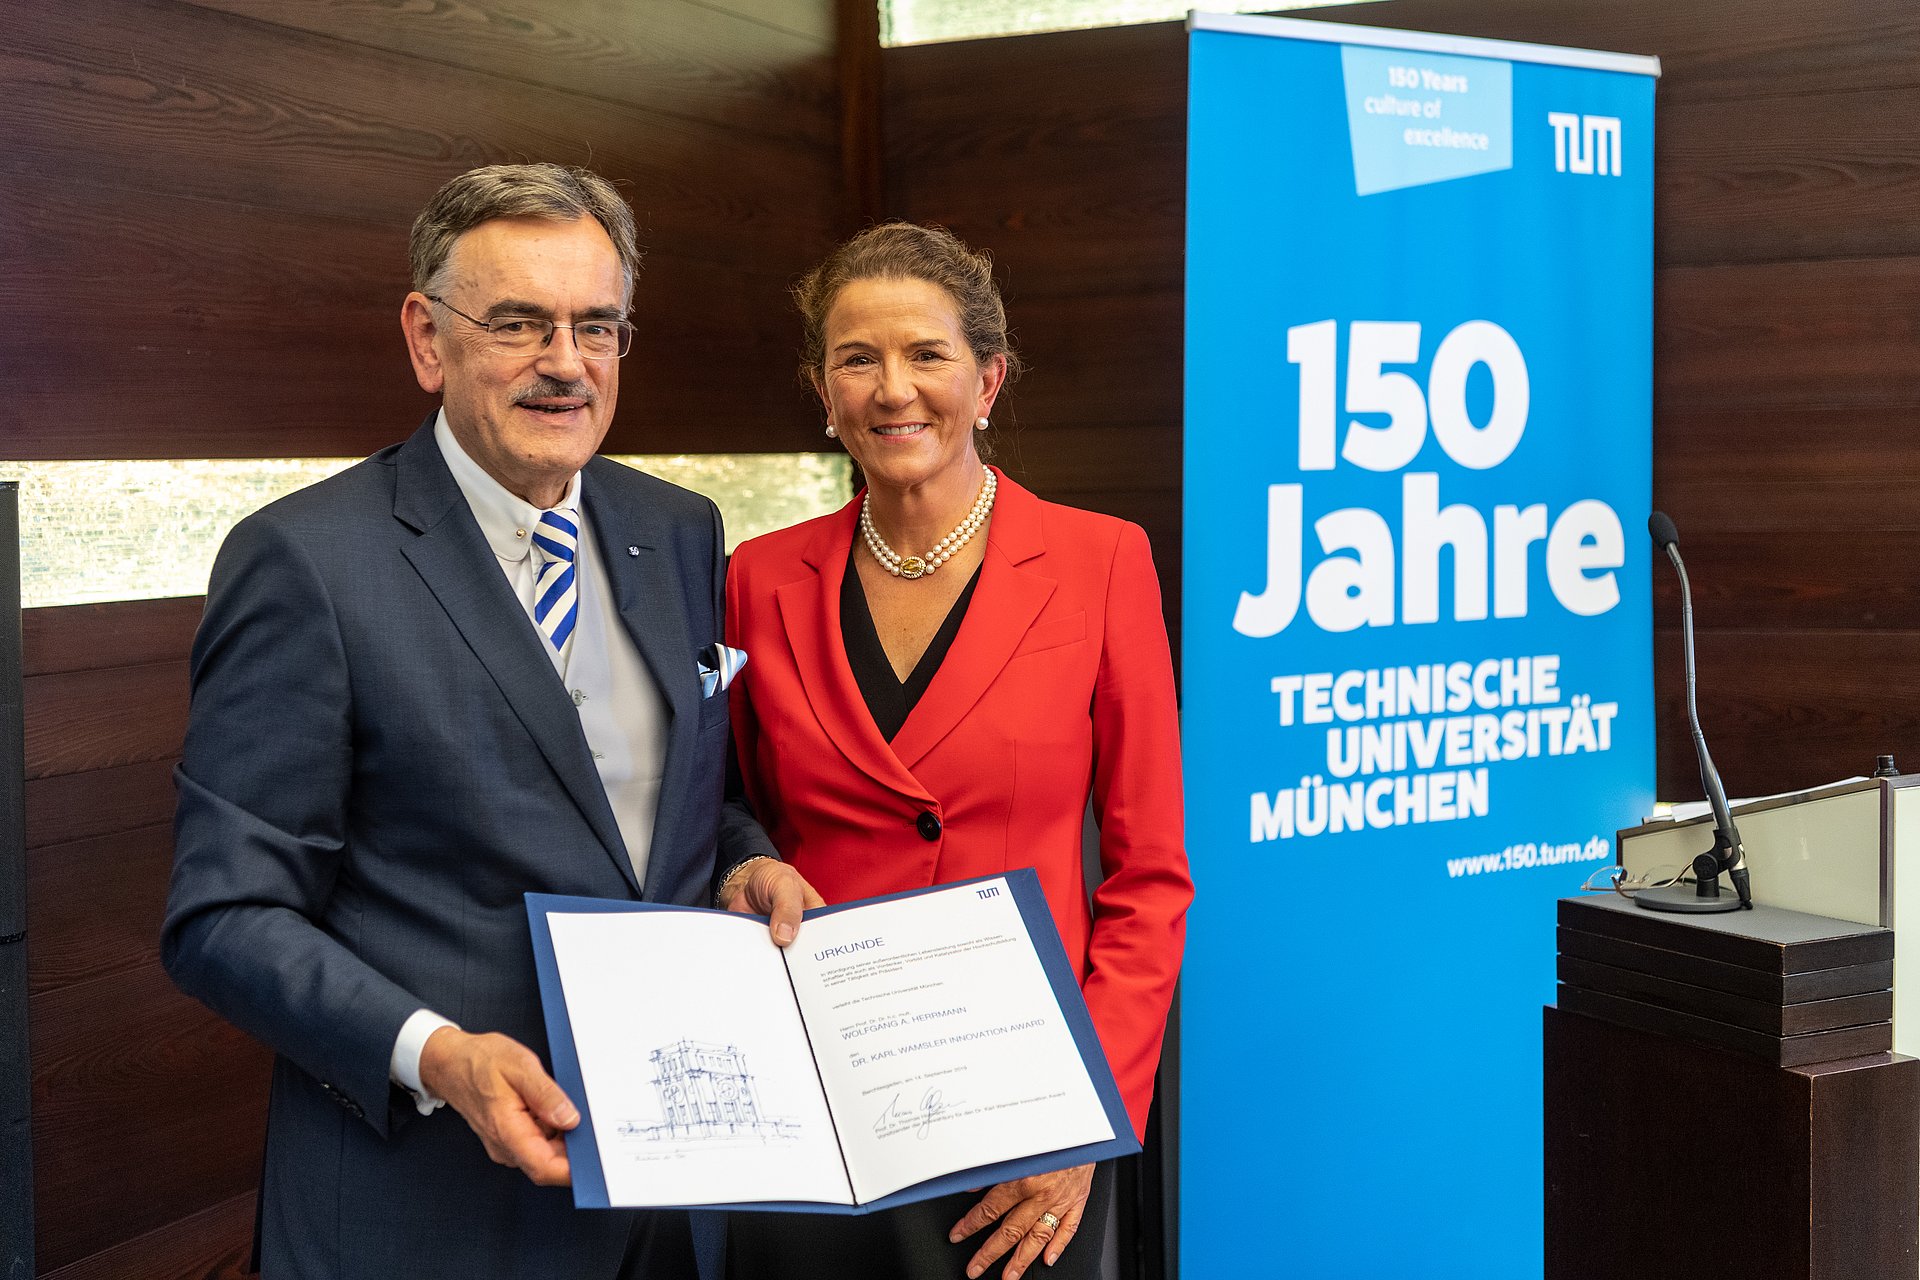 Susanne Wamsler, Clariant Advisory Board member, presents TUM President Wolfgang A. Herrmann with the Dr. Karl Wamsler Innovation Award, presented by Clariant and TUM.